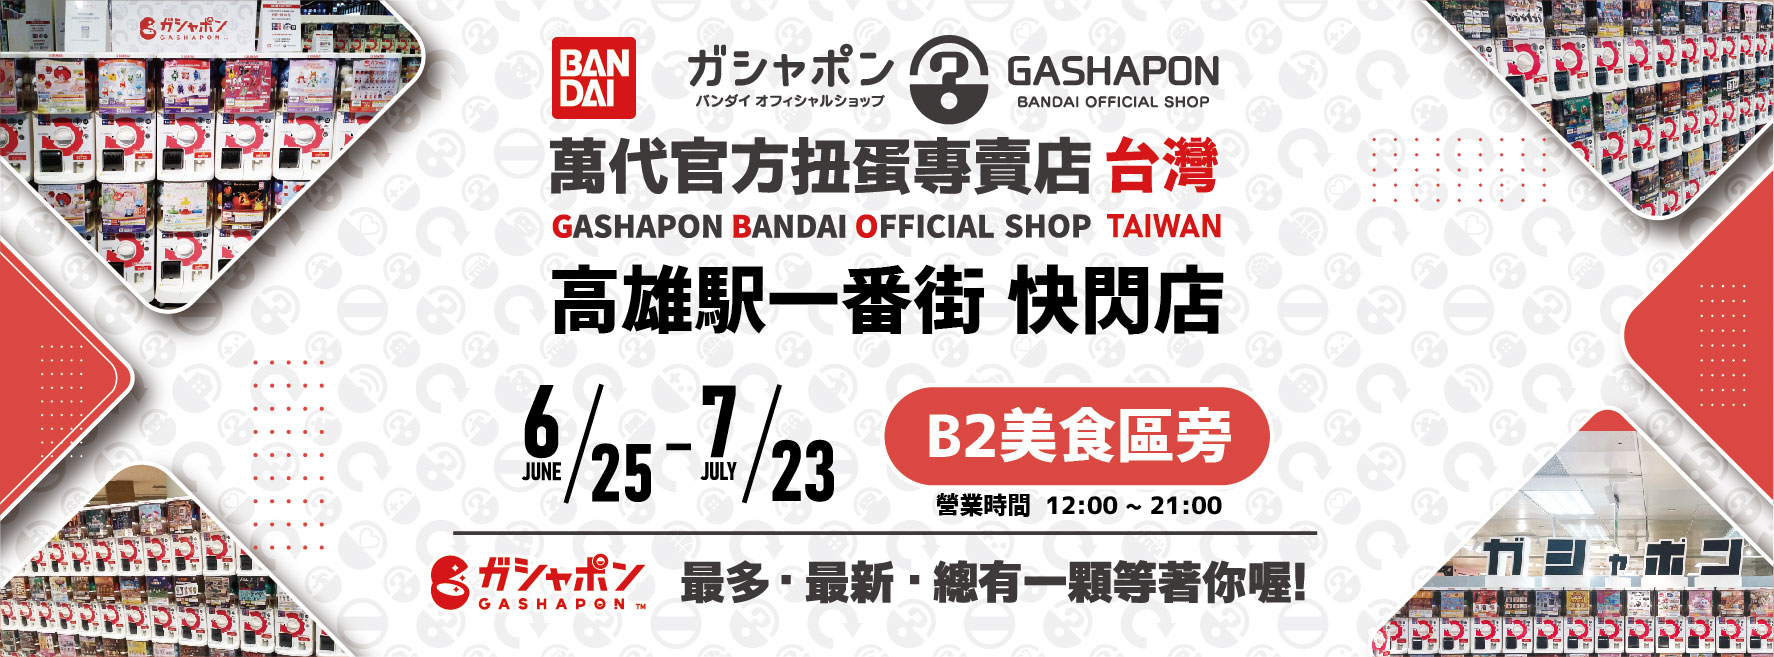 Bandai Gashapon official pop-up store will be opened on the 1st floor of Sanchuang from December 7, 2023